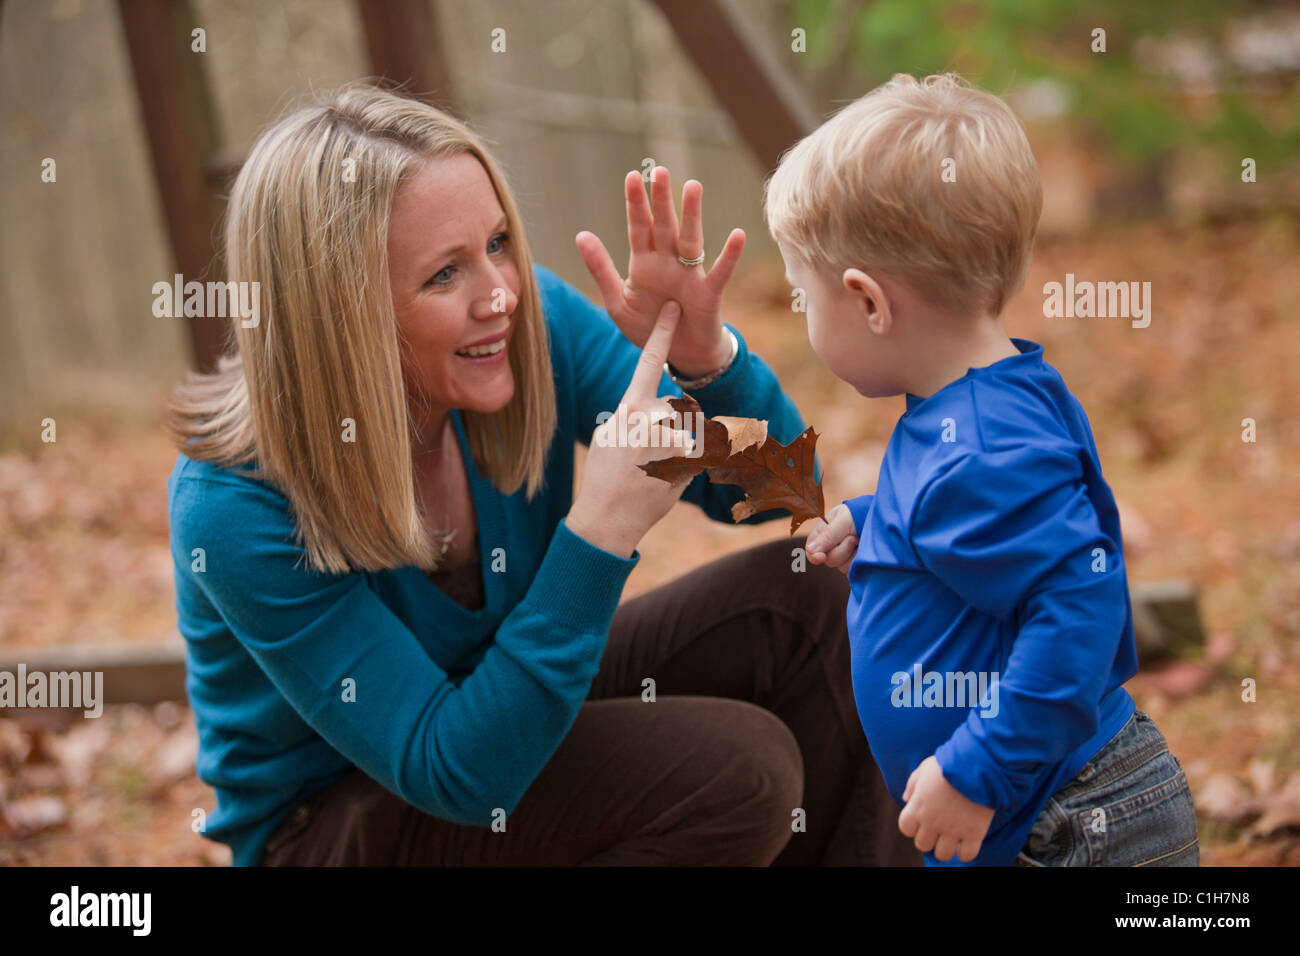 Woman signing the word 'Leaf' in American Sign Language while communicating with her son Stock Photo